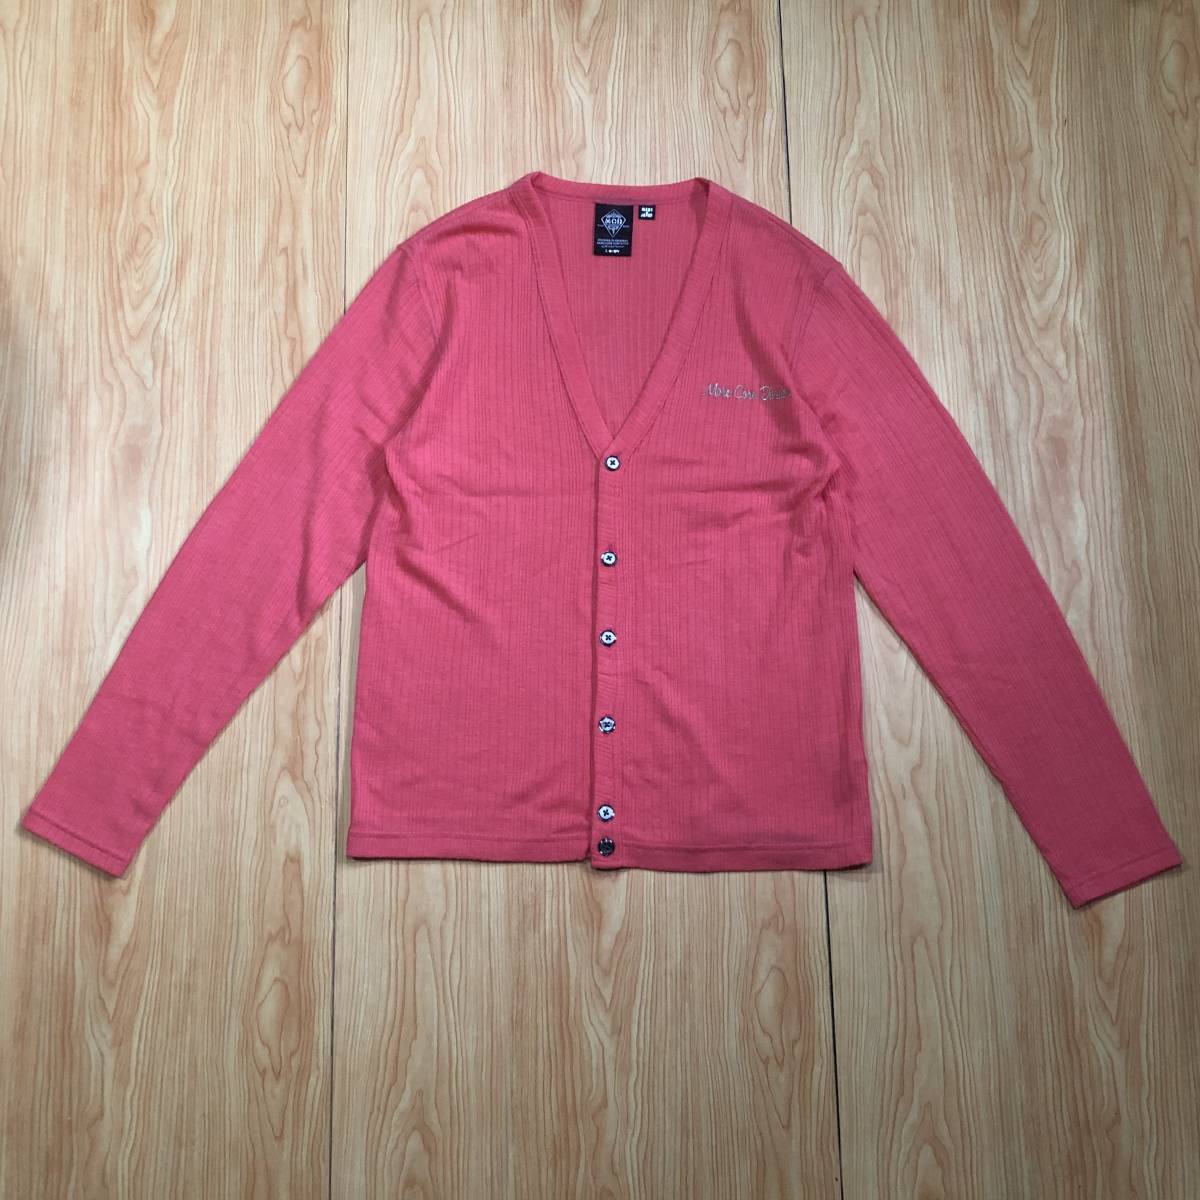  prompt decision * click post shipping *MCD*MoreCoreDivision. high gauge knitted. sama . cut and sewn material. cardigan *L* salmon pink * made in Japan 